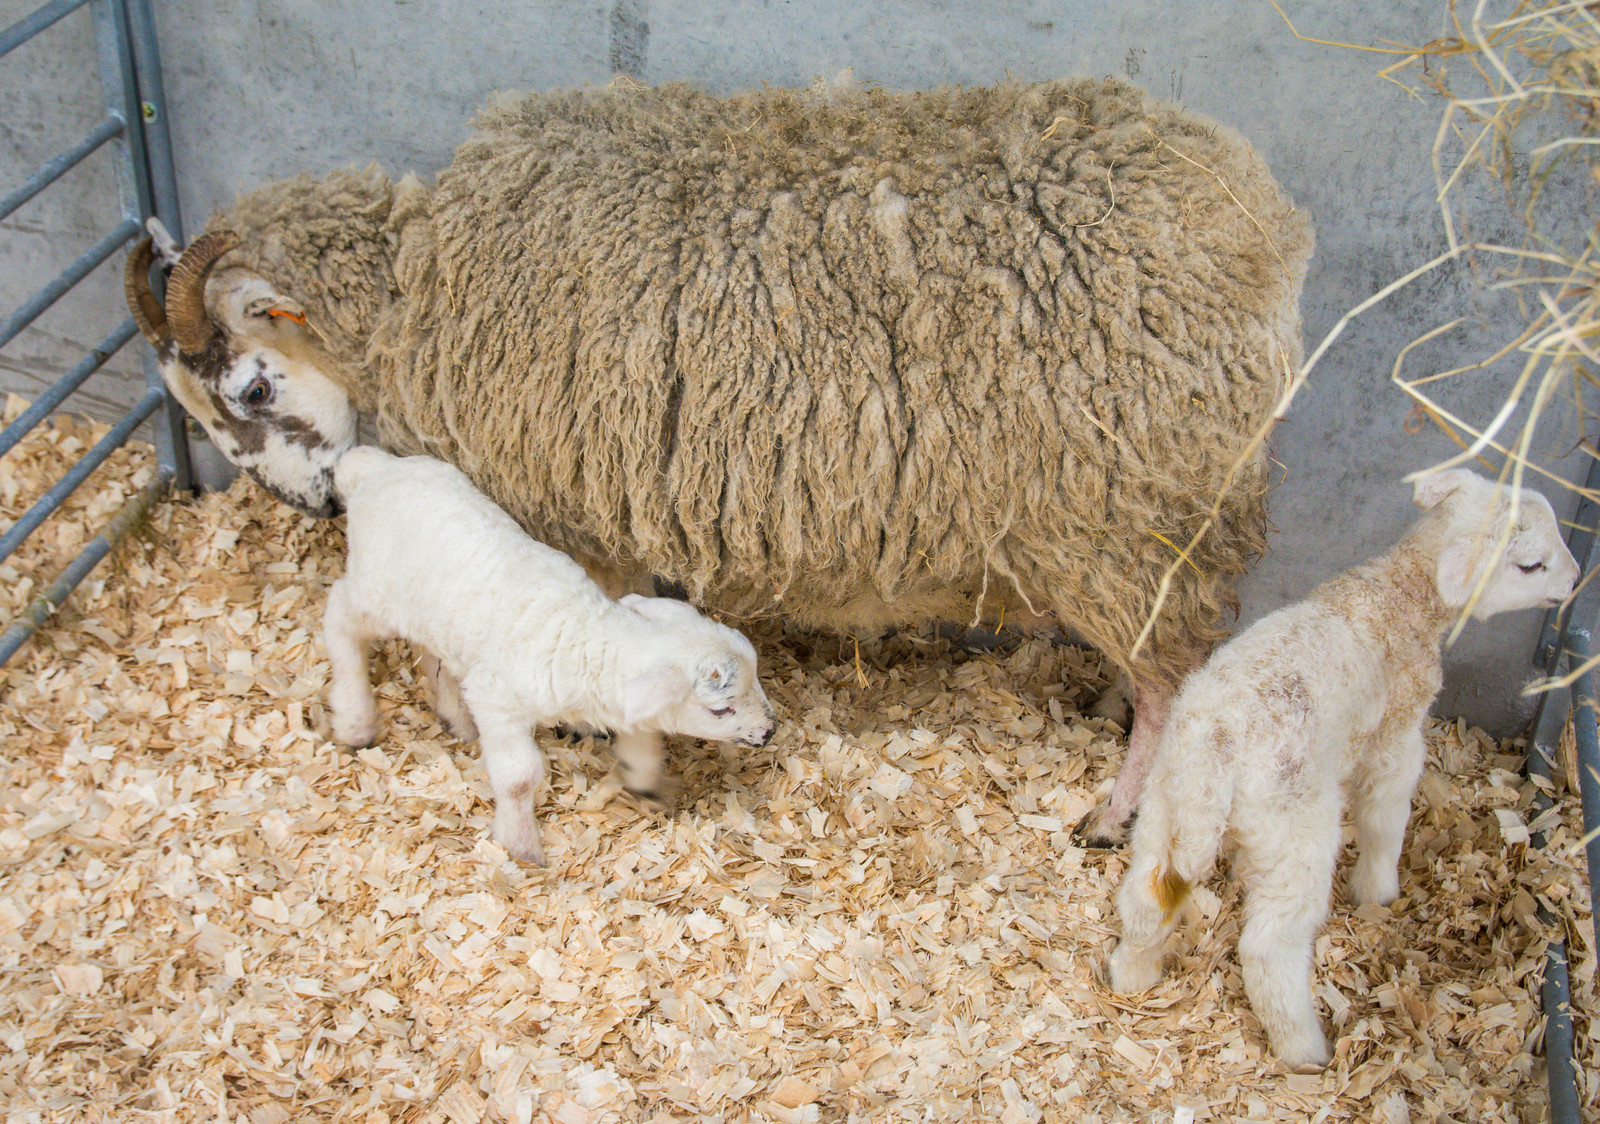 A further study investigated lambing onto woodchip compared to straw and found there to be no differences in behaviour or lamb survival